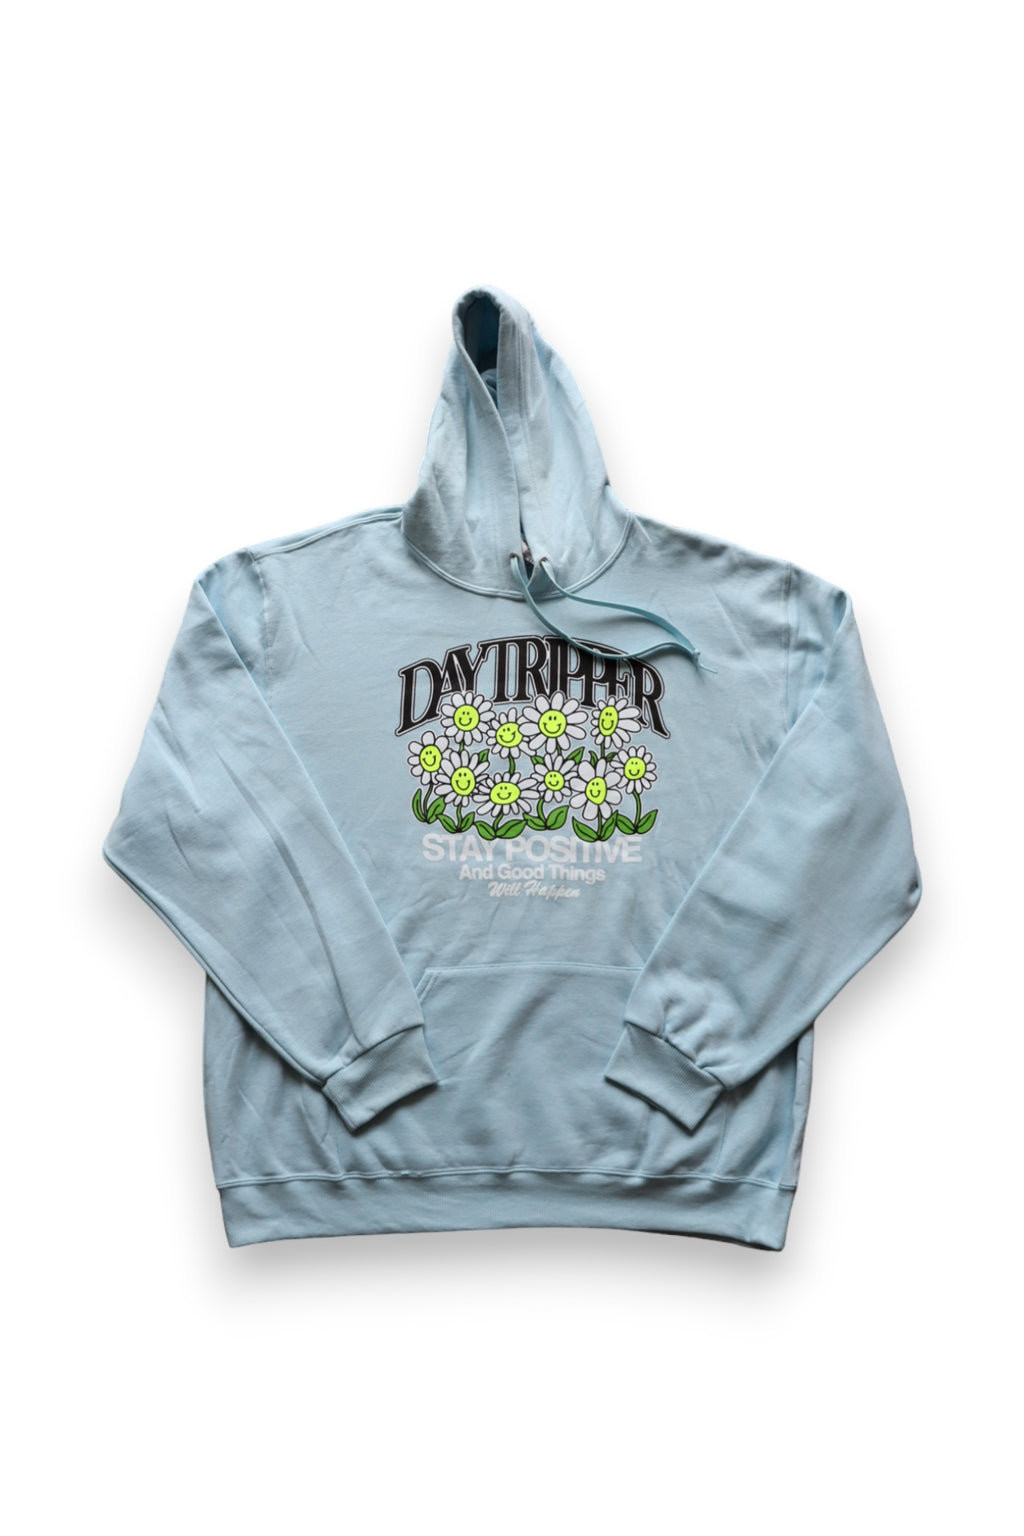 STAY POSITIVE HOODIE - BABY BLUE